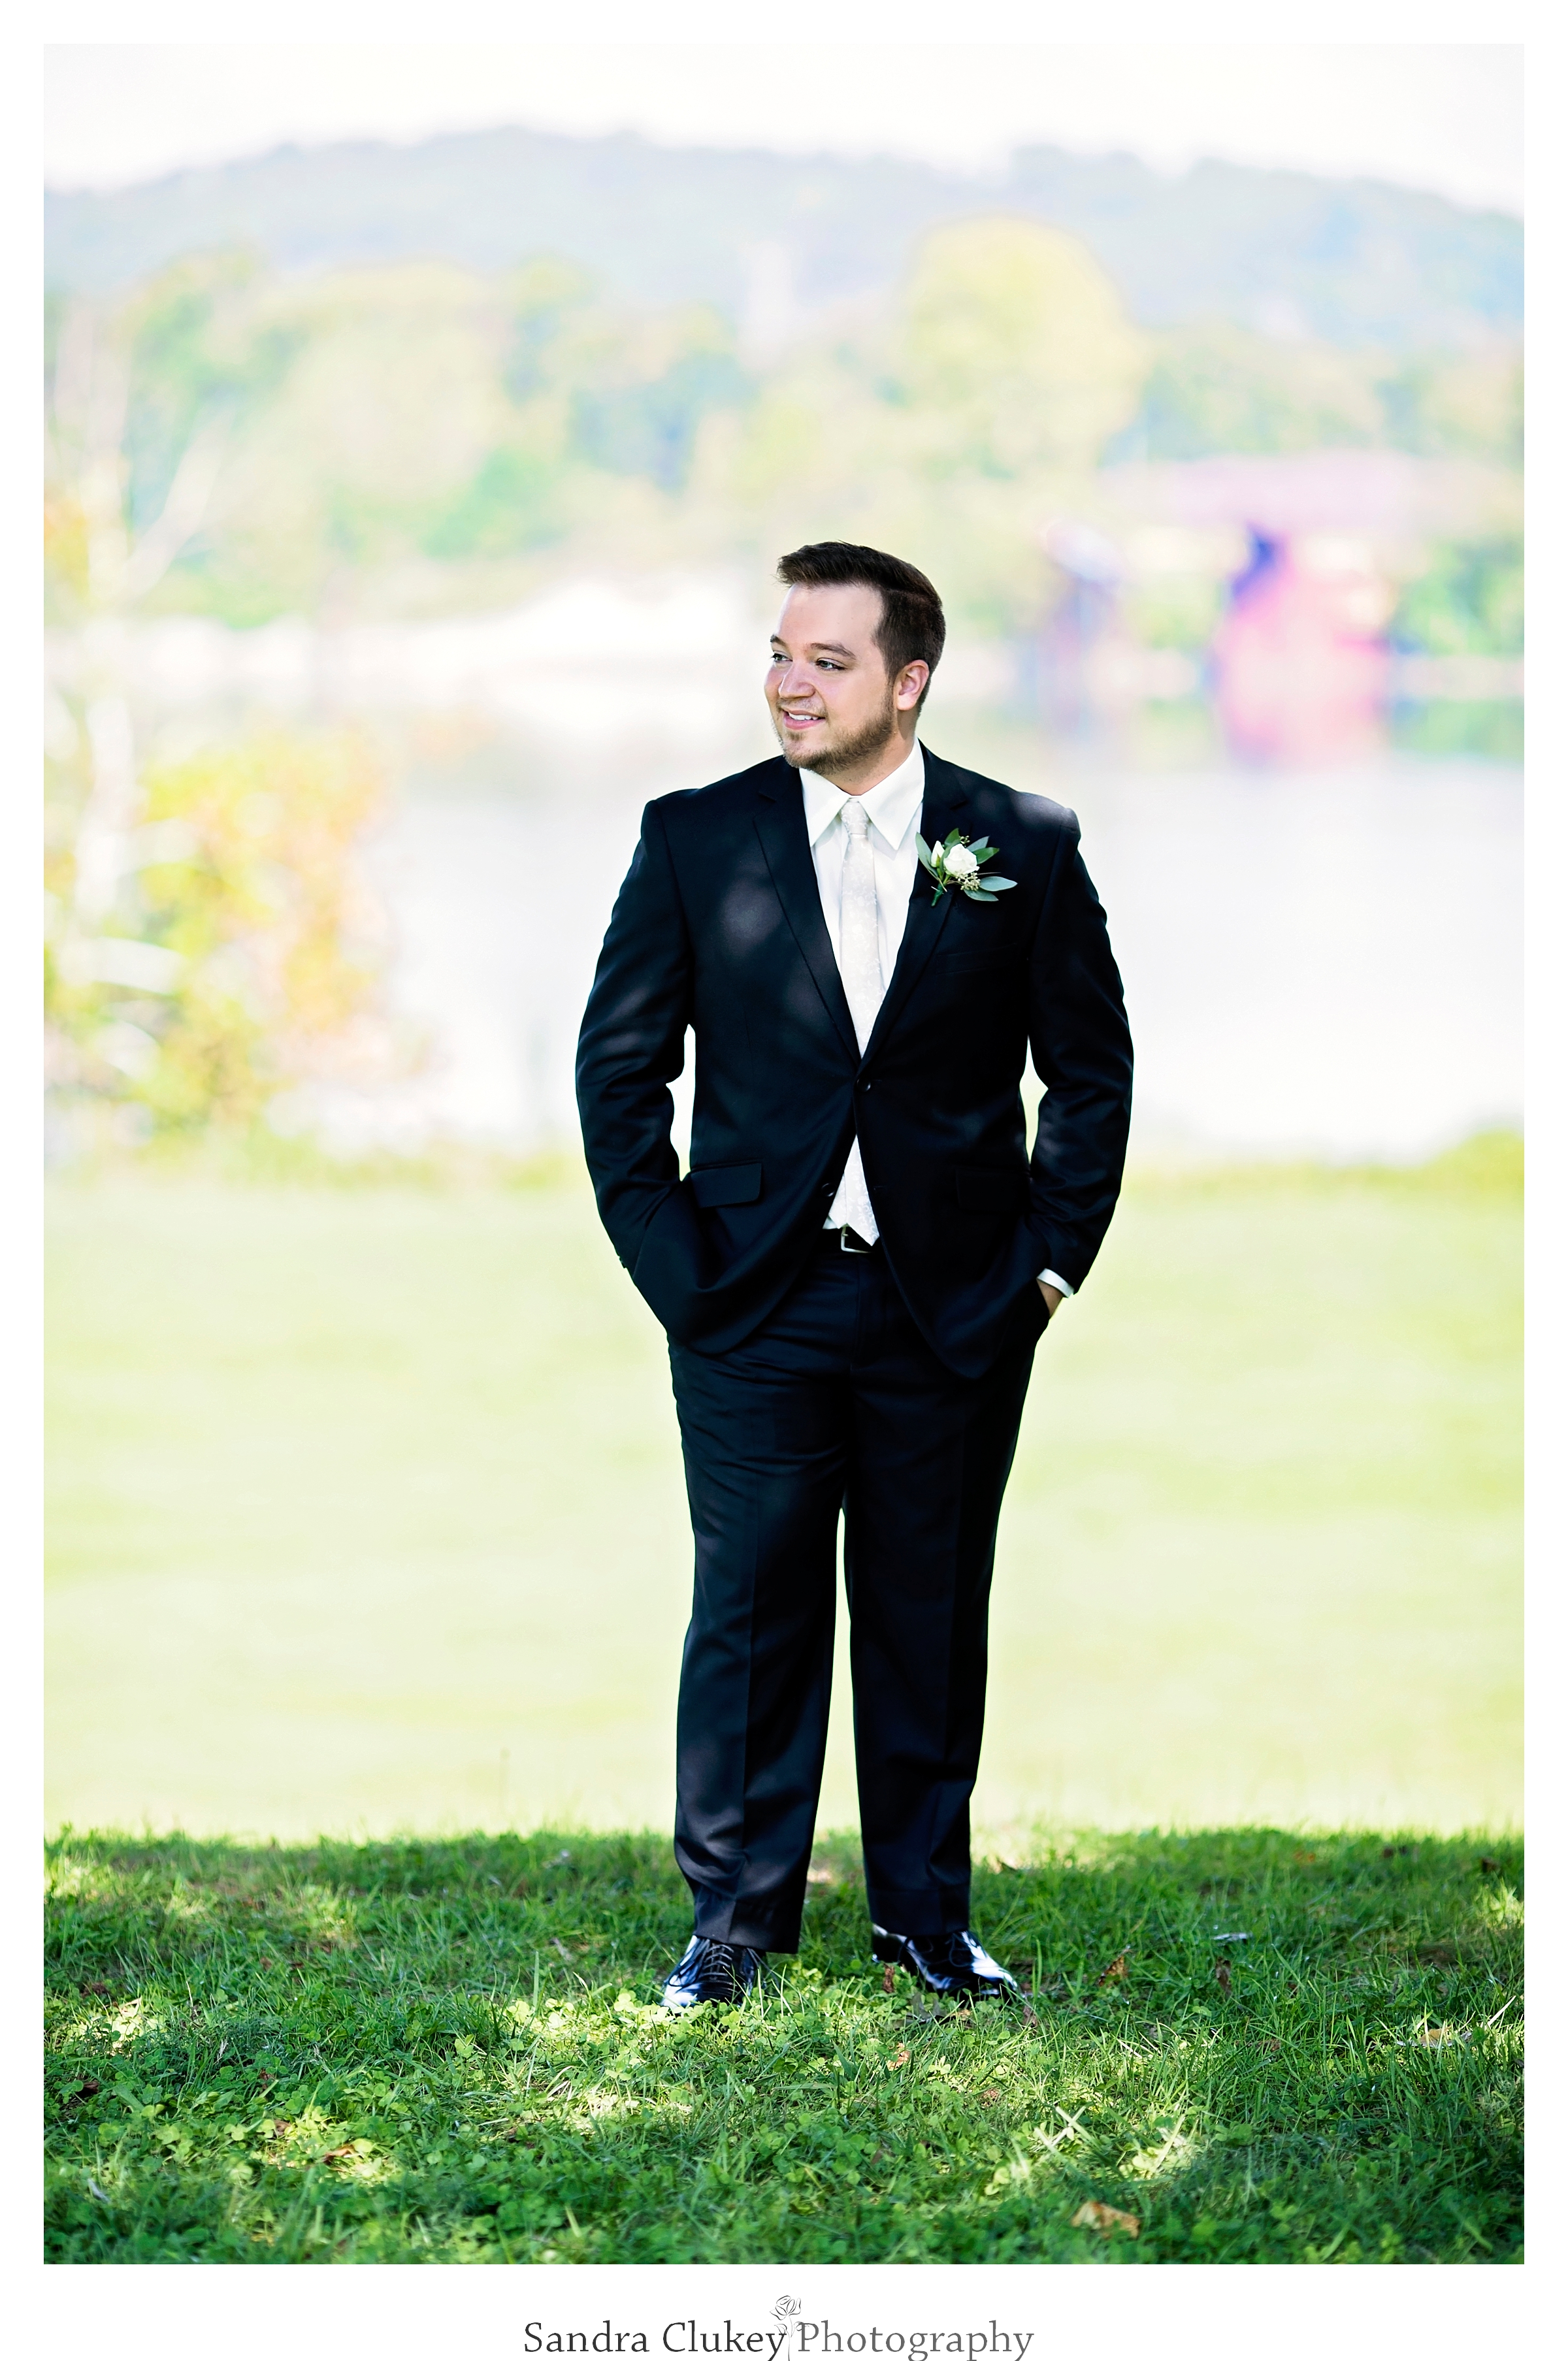 Tennessee RiverPlace, Chattanooga TN. Handsome groom awaits